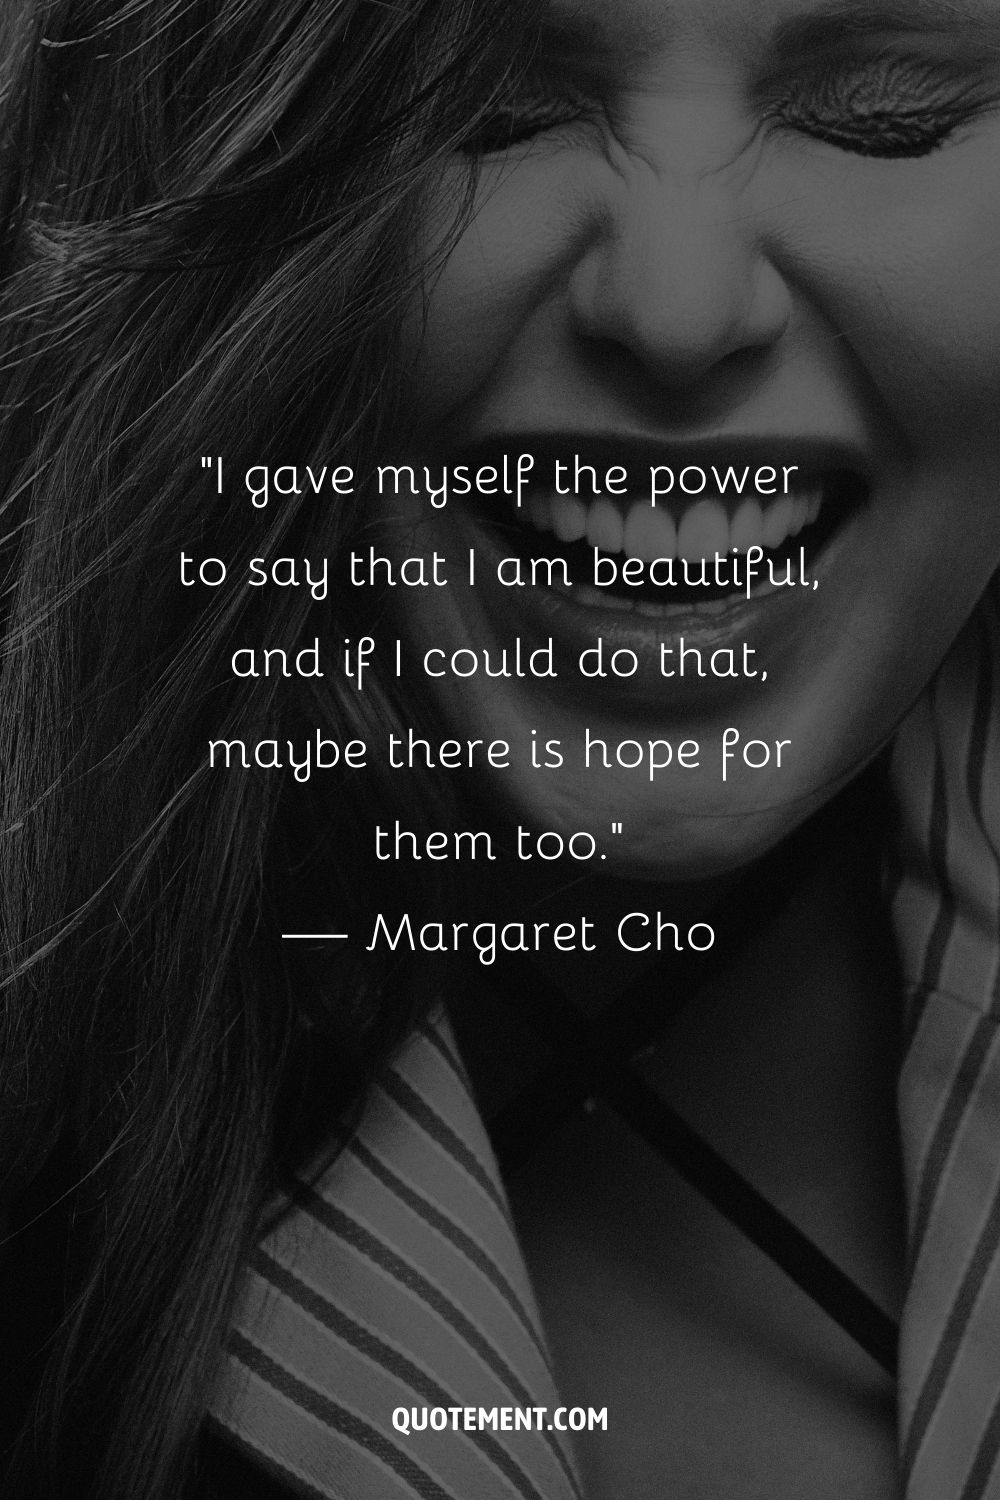 I gave myself the power to say that I am beautiful, and if I could do that, maybe there is hope for them too. — Margaret Cho